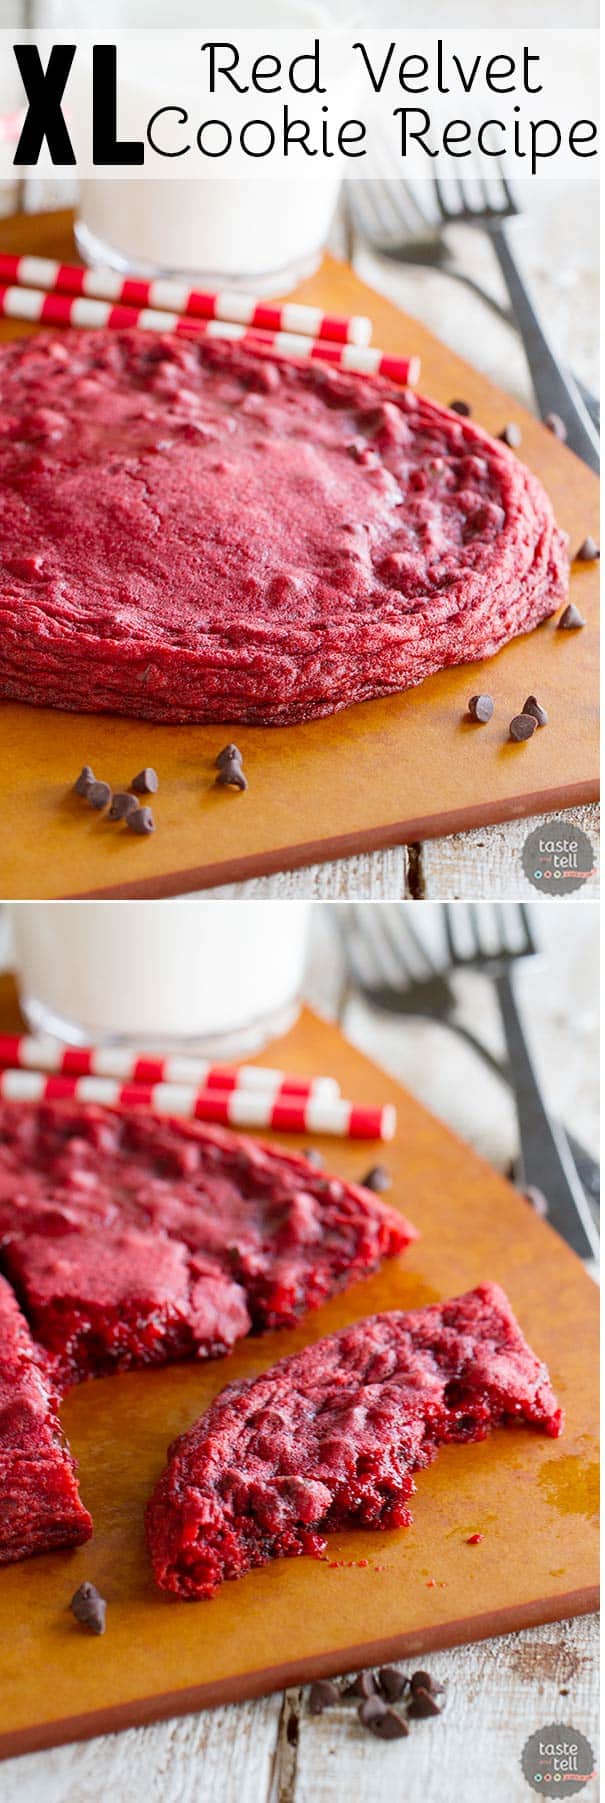 The perfect cookie for 2 - this XL Red Velvet Cookie Recipe is what you need when that craving hits for a cookie!